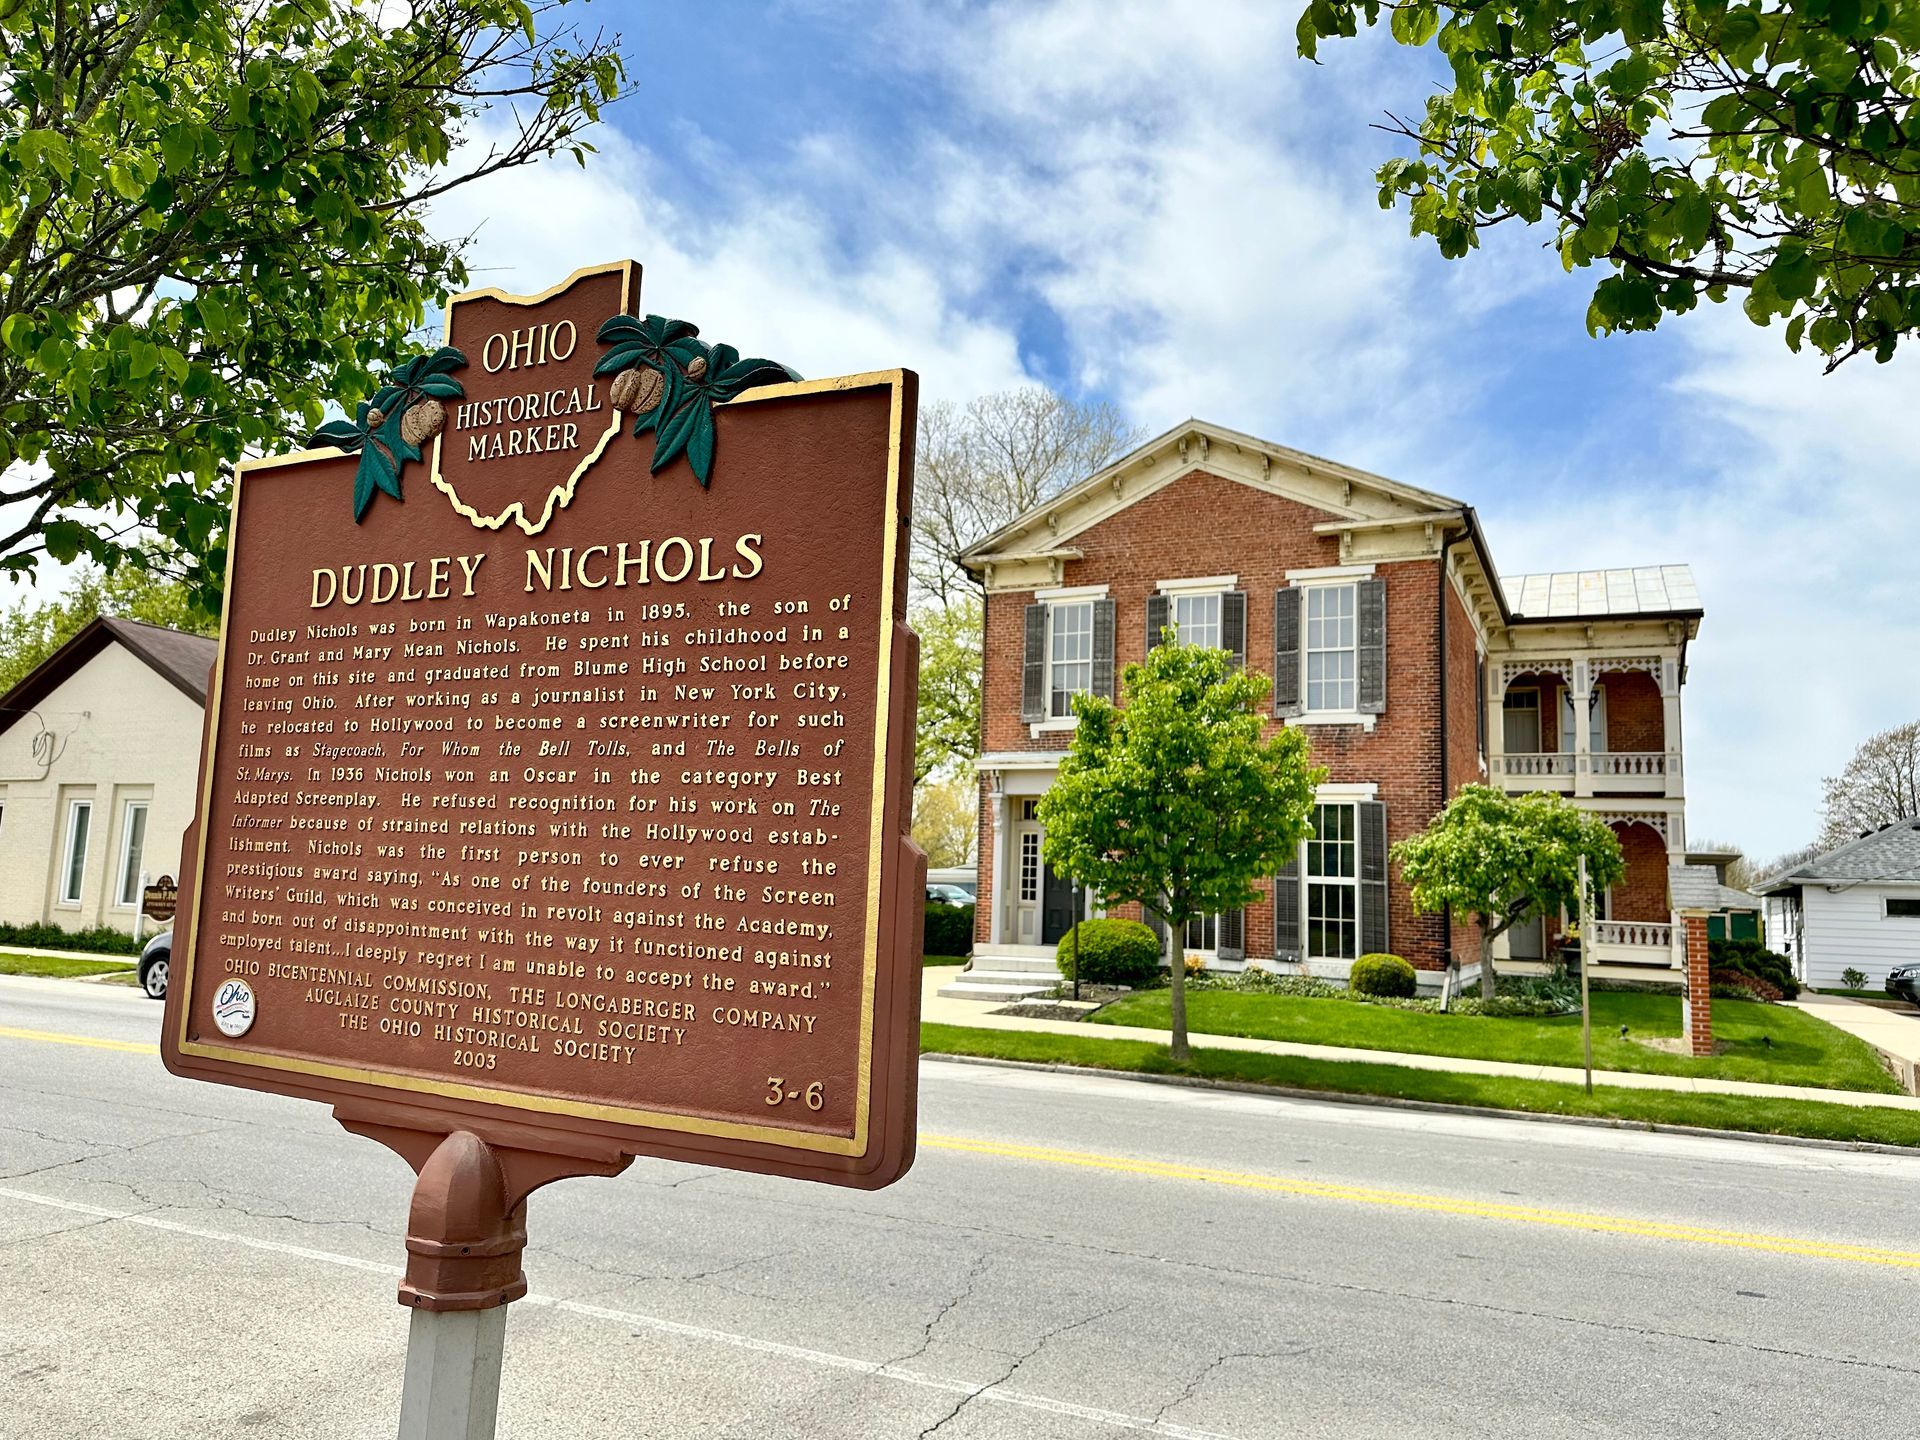 A historical marker for Dudley Nichols is in front of a brick building.